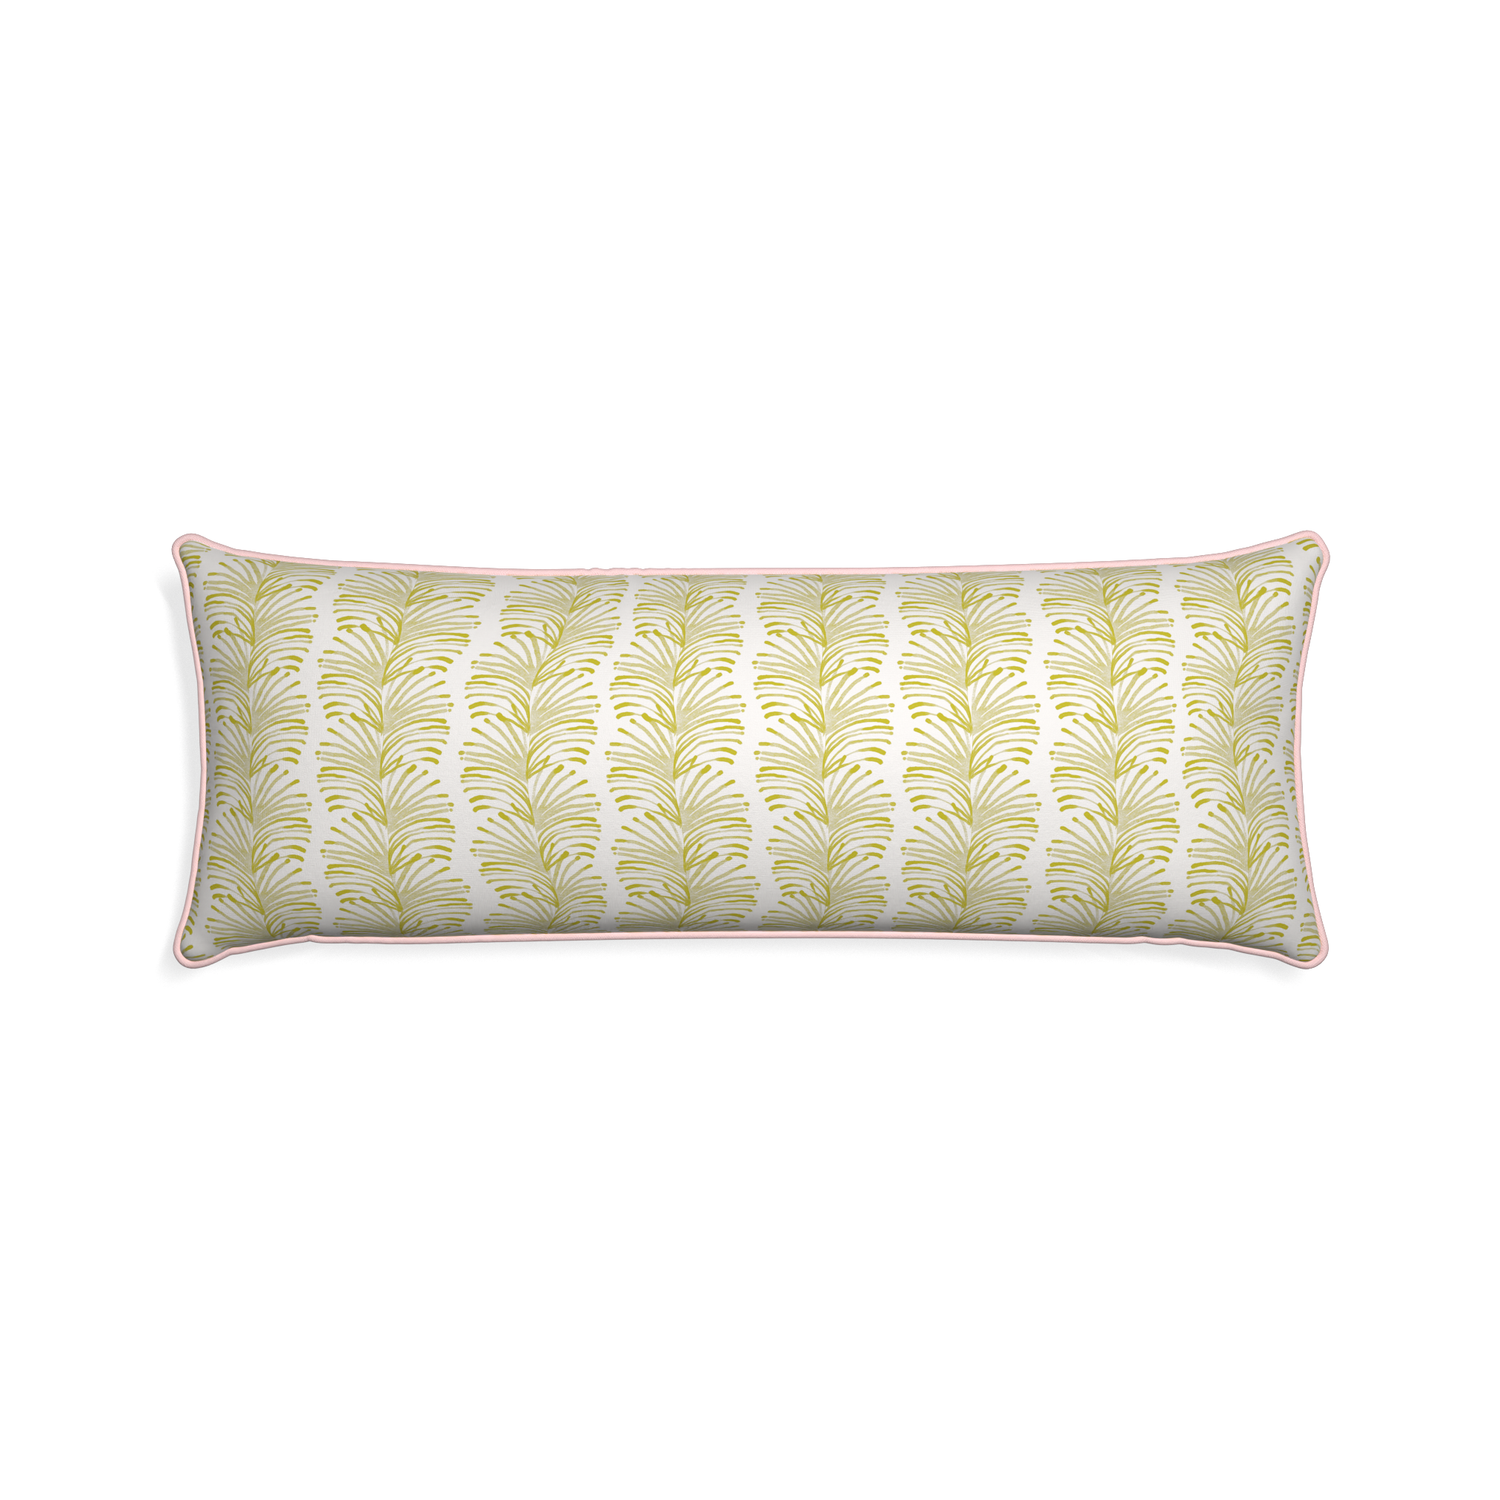 Xl-lumbar emma chartreuse custom yellow stripe chartreusepillow with petal piping on white background